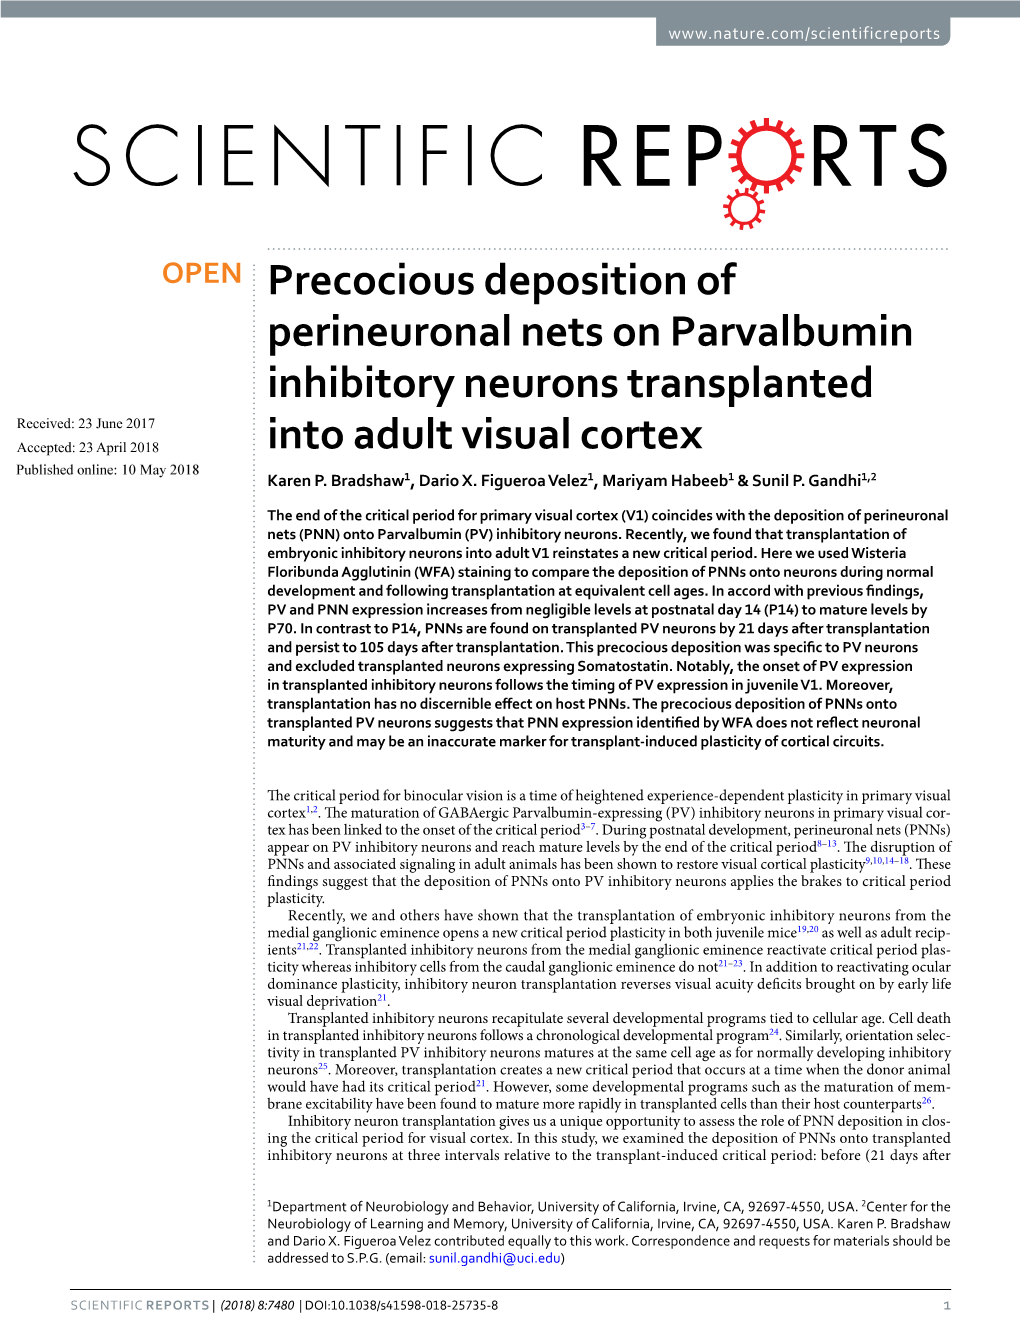 Precocious Deposition of Perineuronal Nets on Parvalbumin Inhibitory Neurons Transplanted Into Adult Visual Cortex